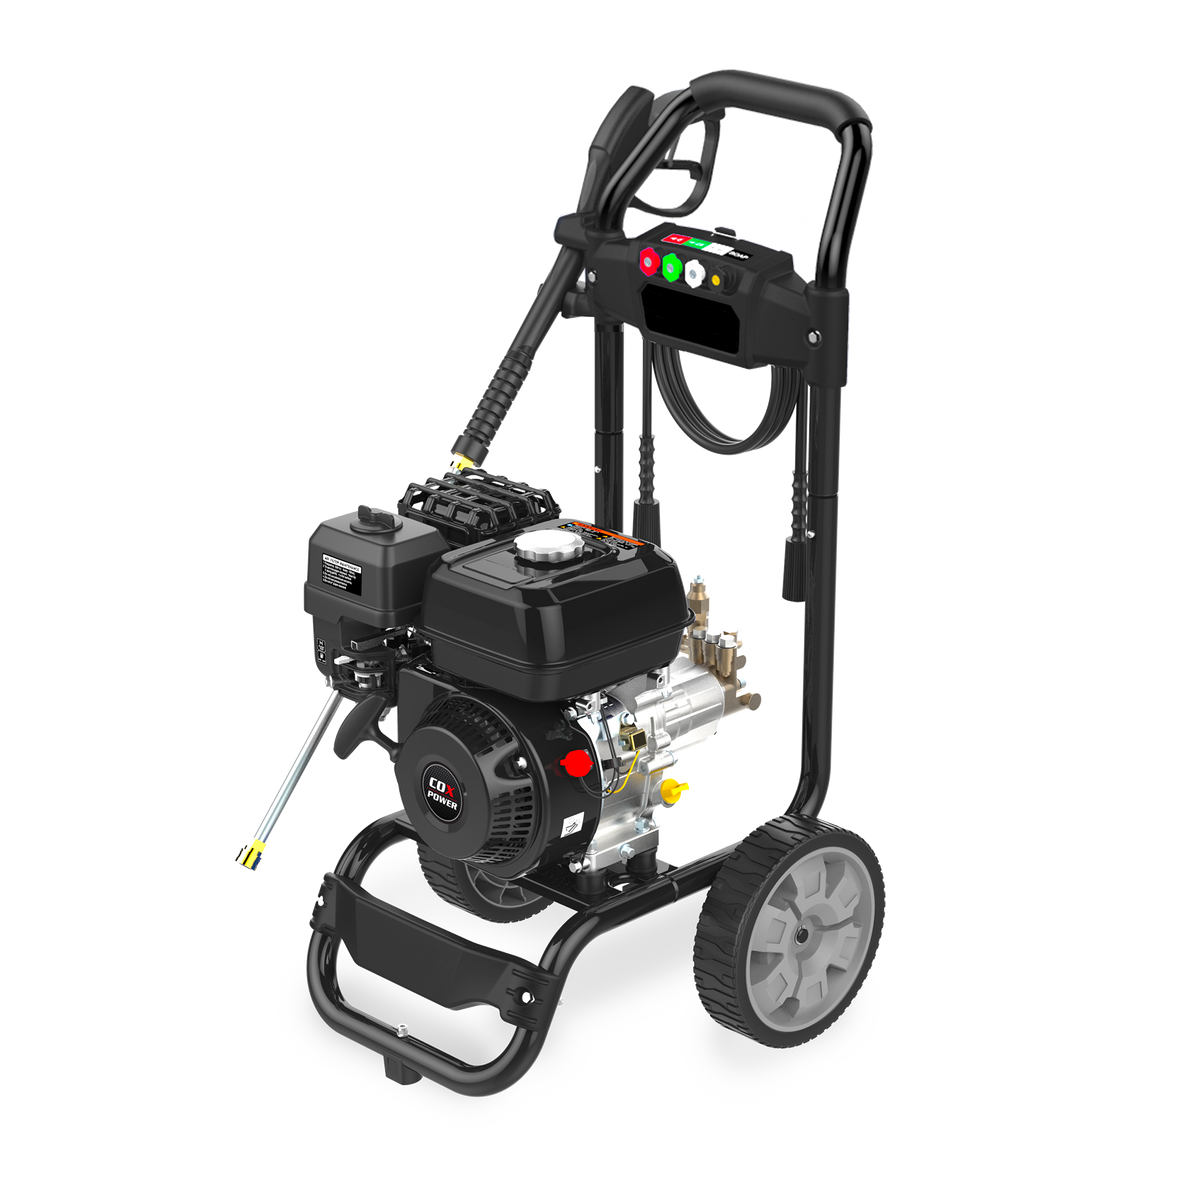 COX Power product image of a high pressure series pressure washer 3300psi